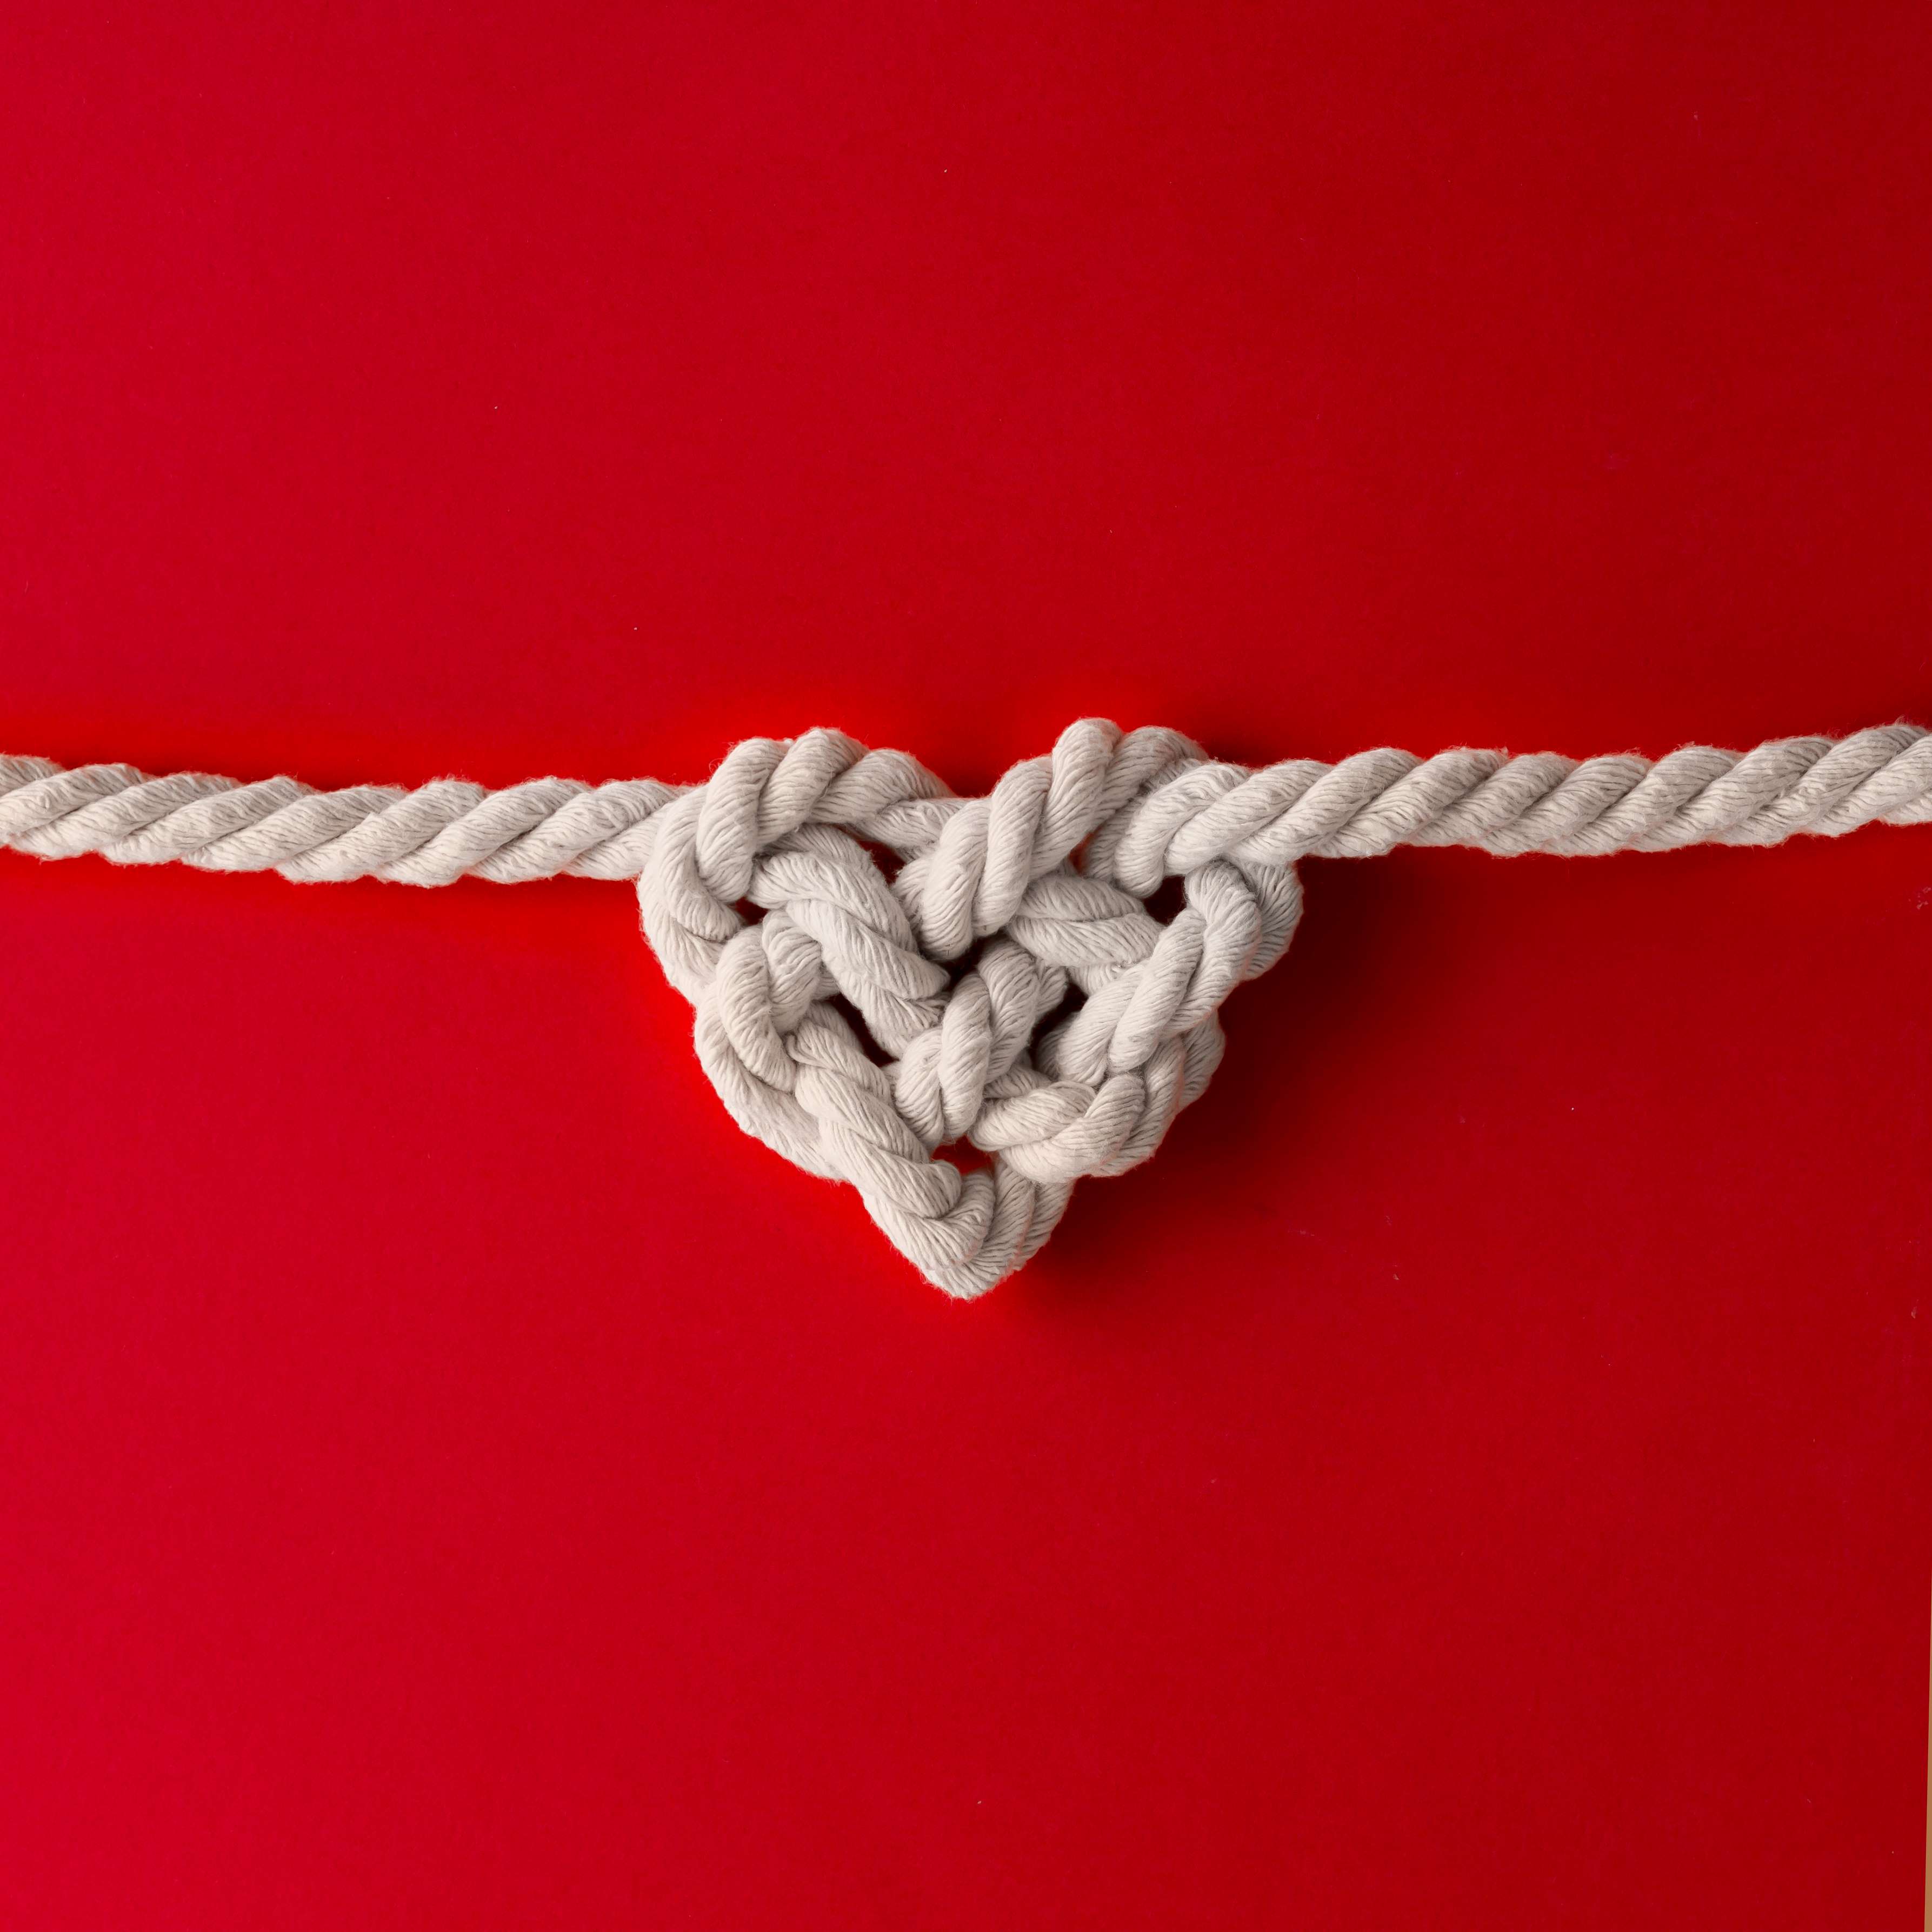 white-rope-in-heart-shape-knot-on-red-background-2021-08-27-11-12-45-utc_r